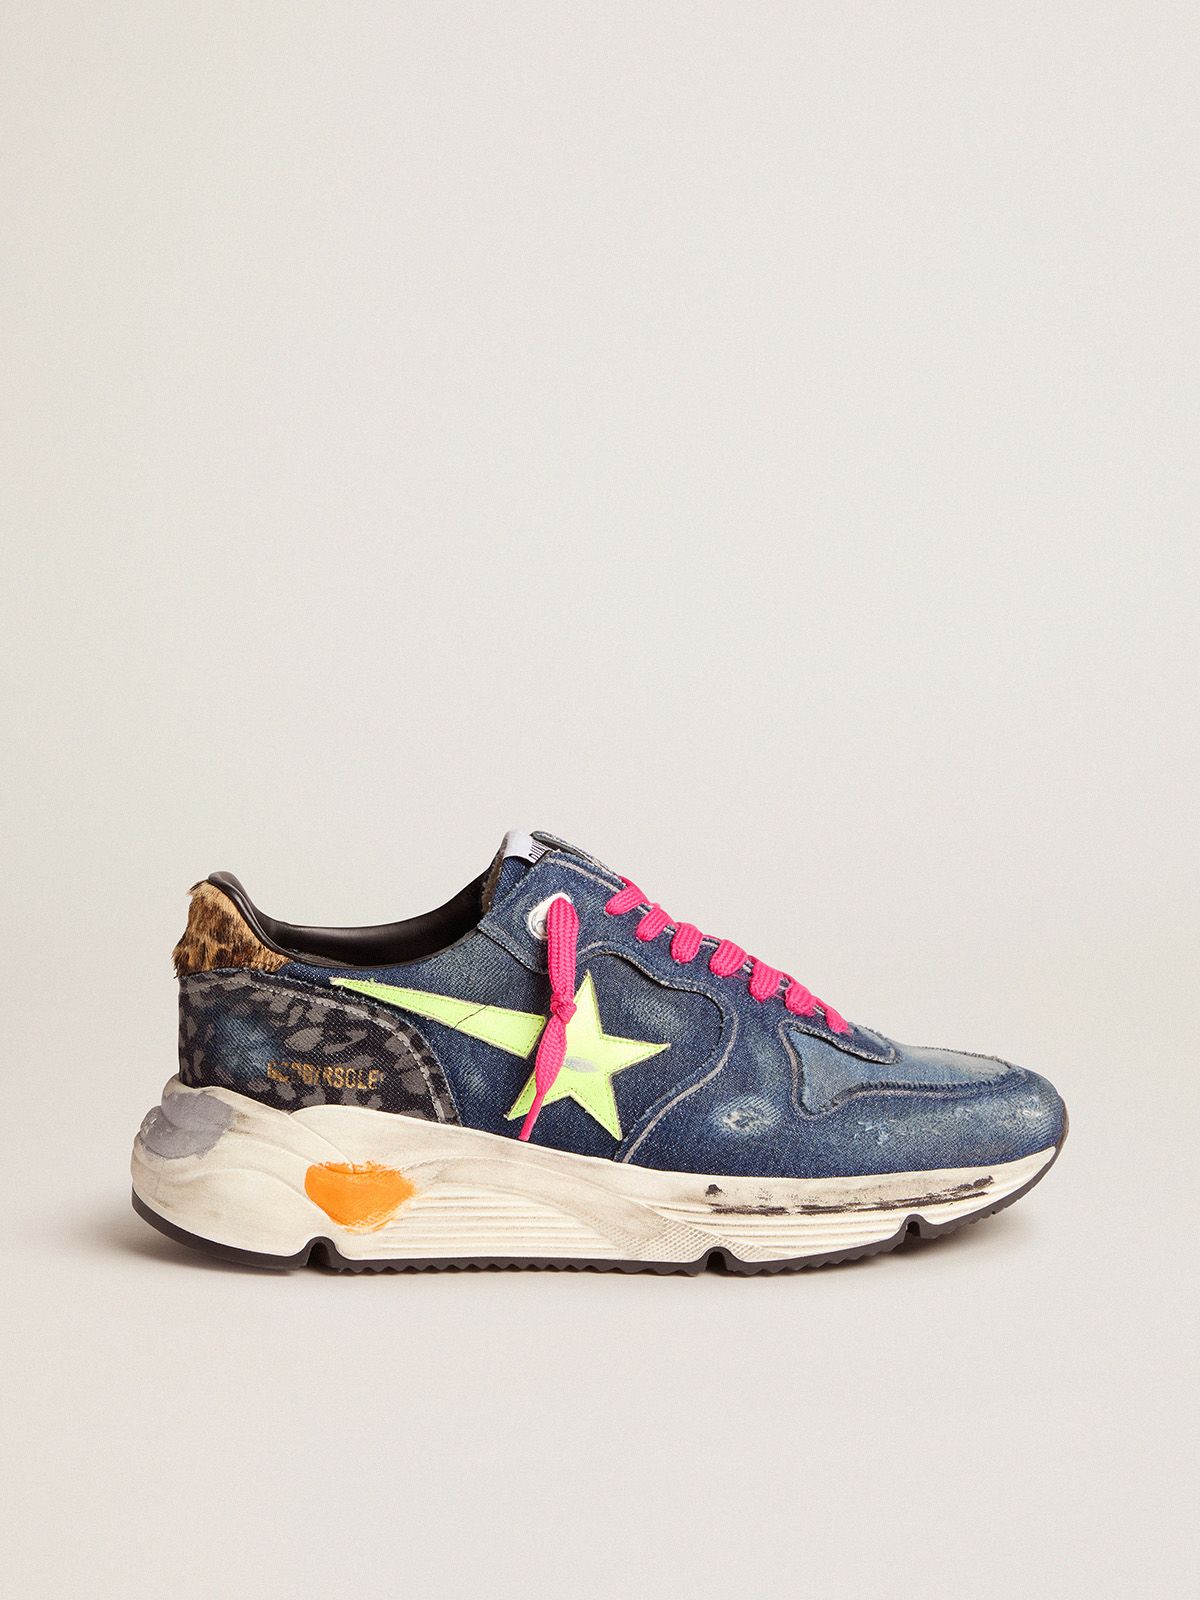 golden goose skin fluorescent sneakers star Denim Running leopard-print Sole a yellow and with tab heel pony